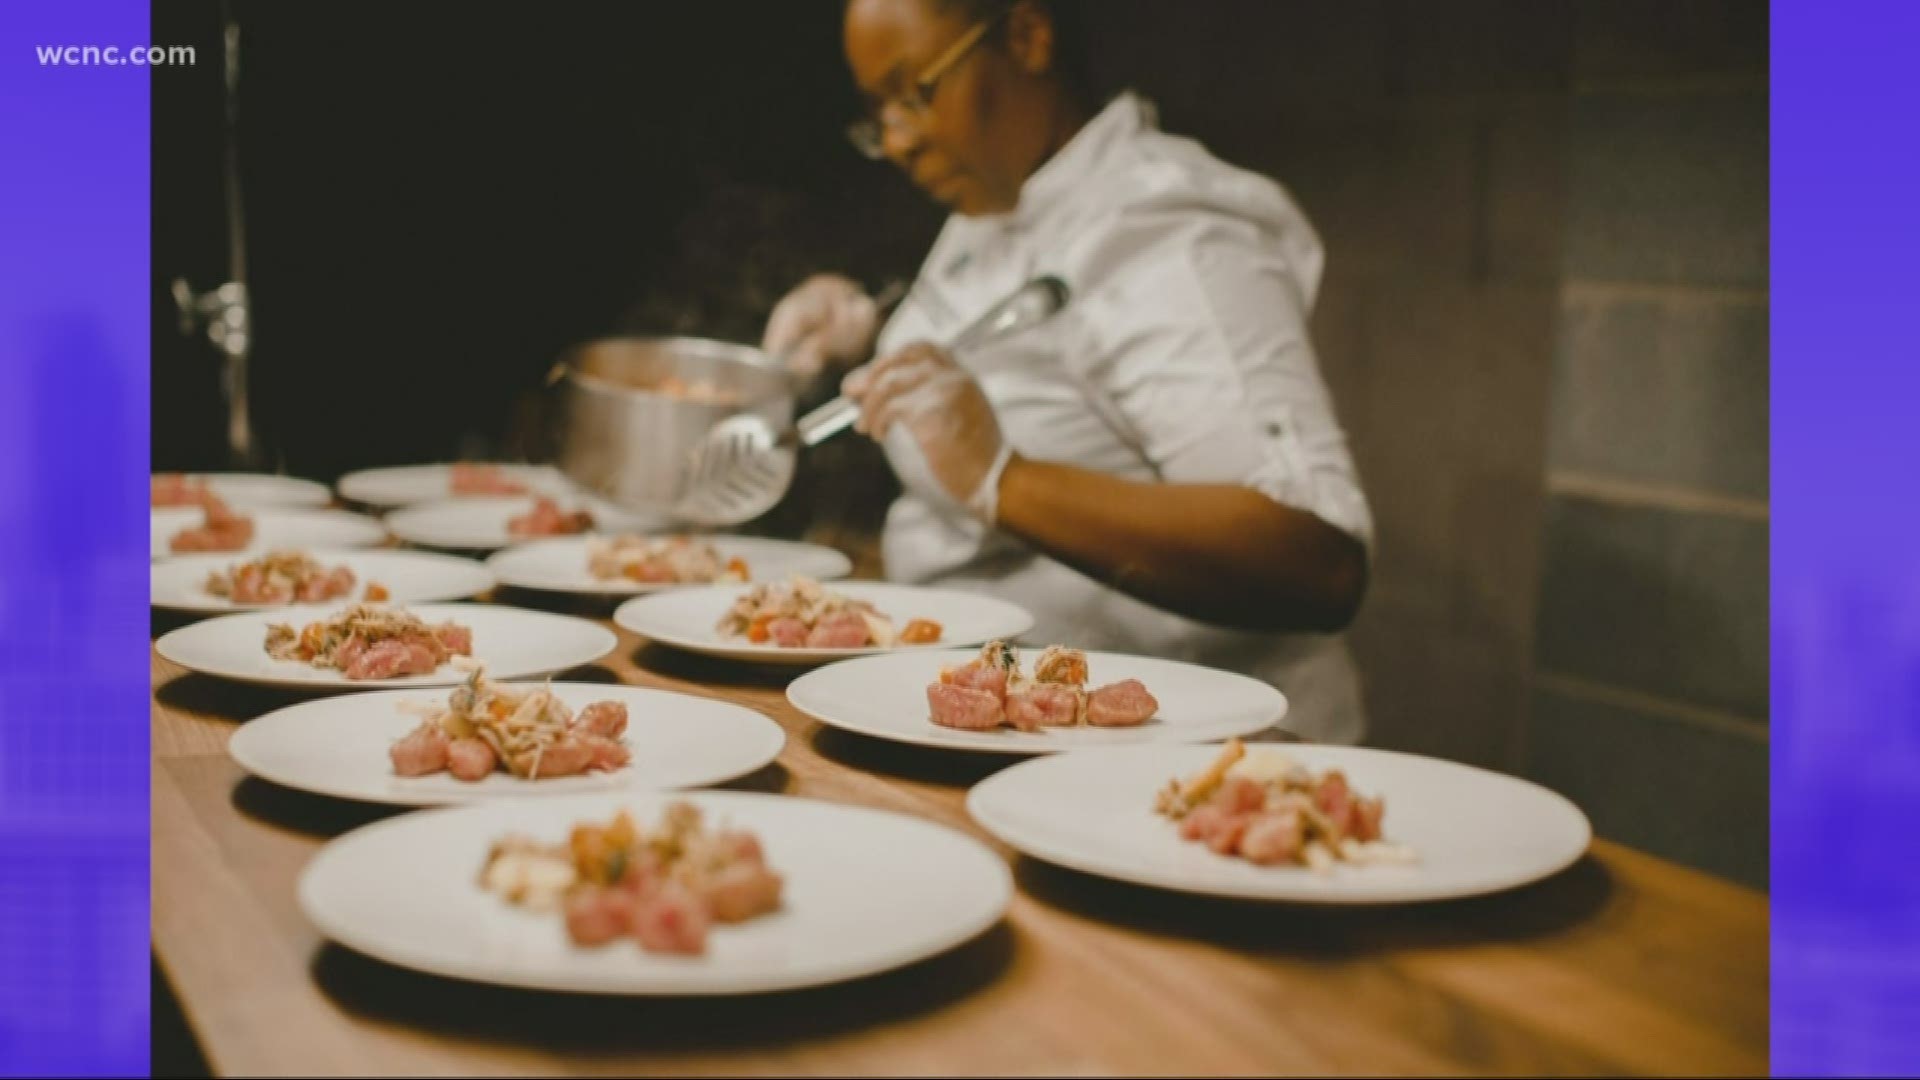 A unique dining experience in Charlotte that allows well-known chefs and artists to collaborate for an unforgettable night.